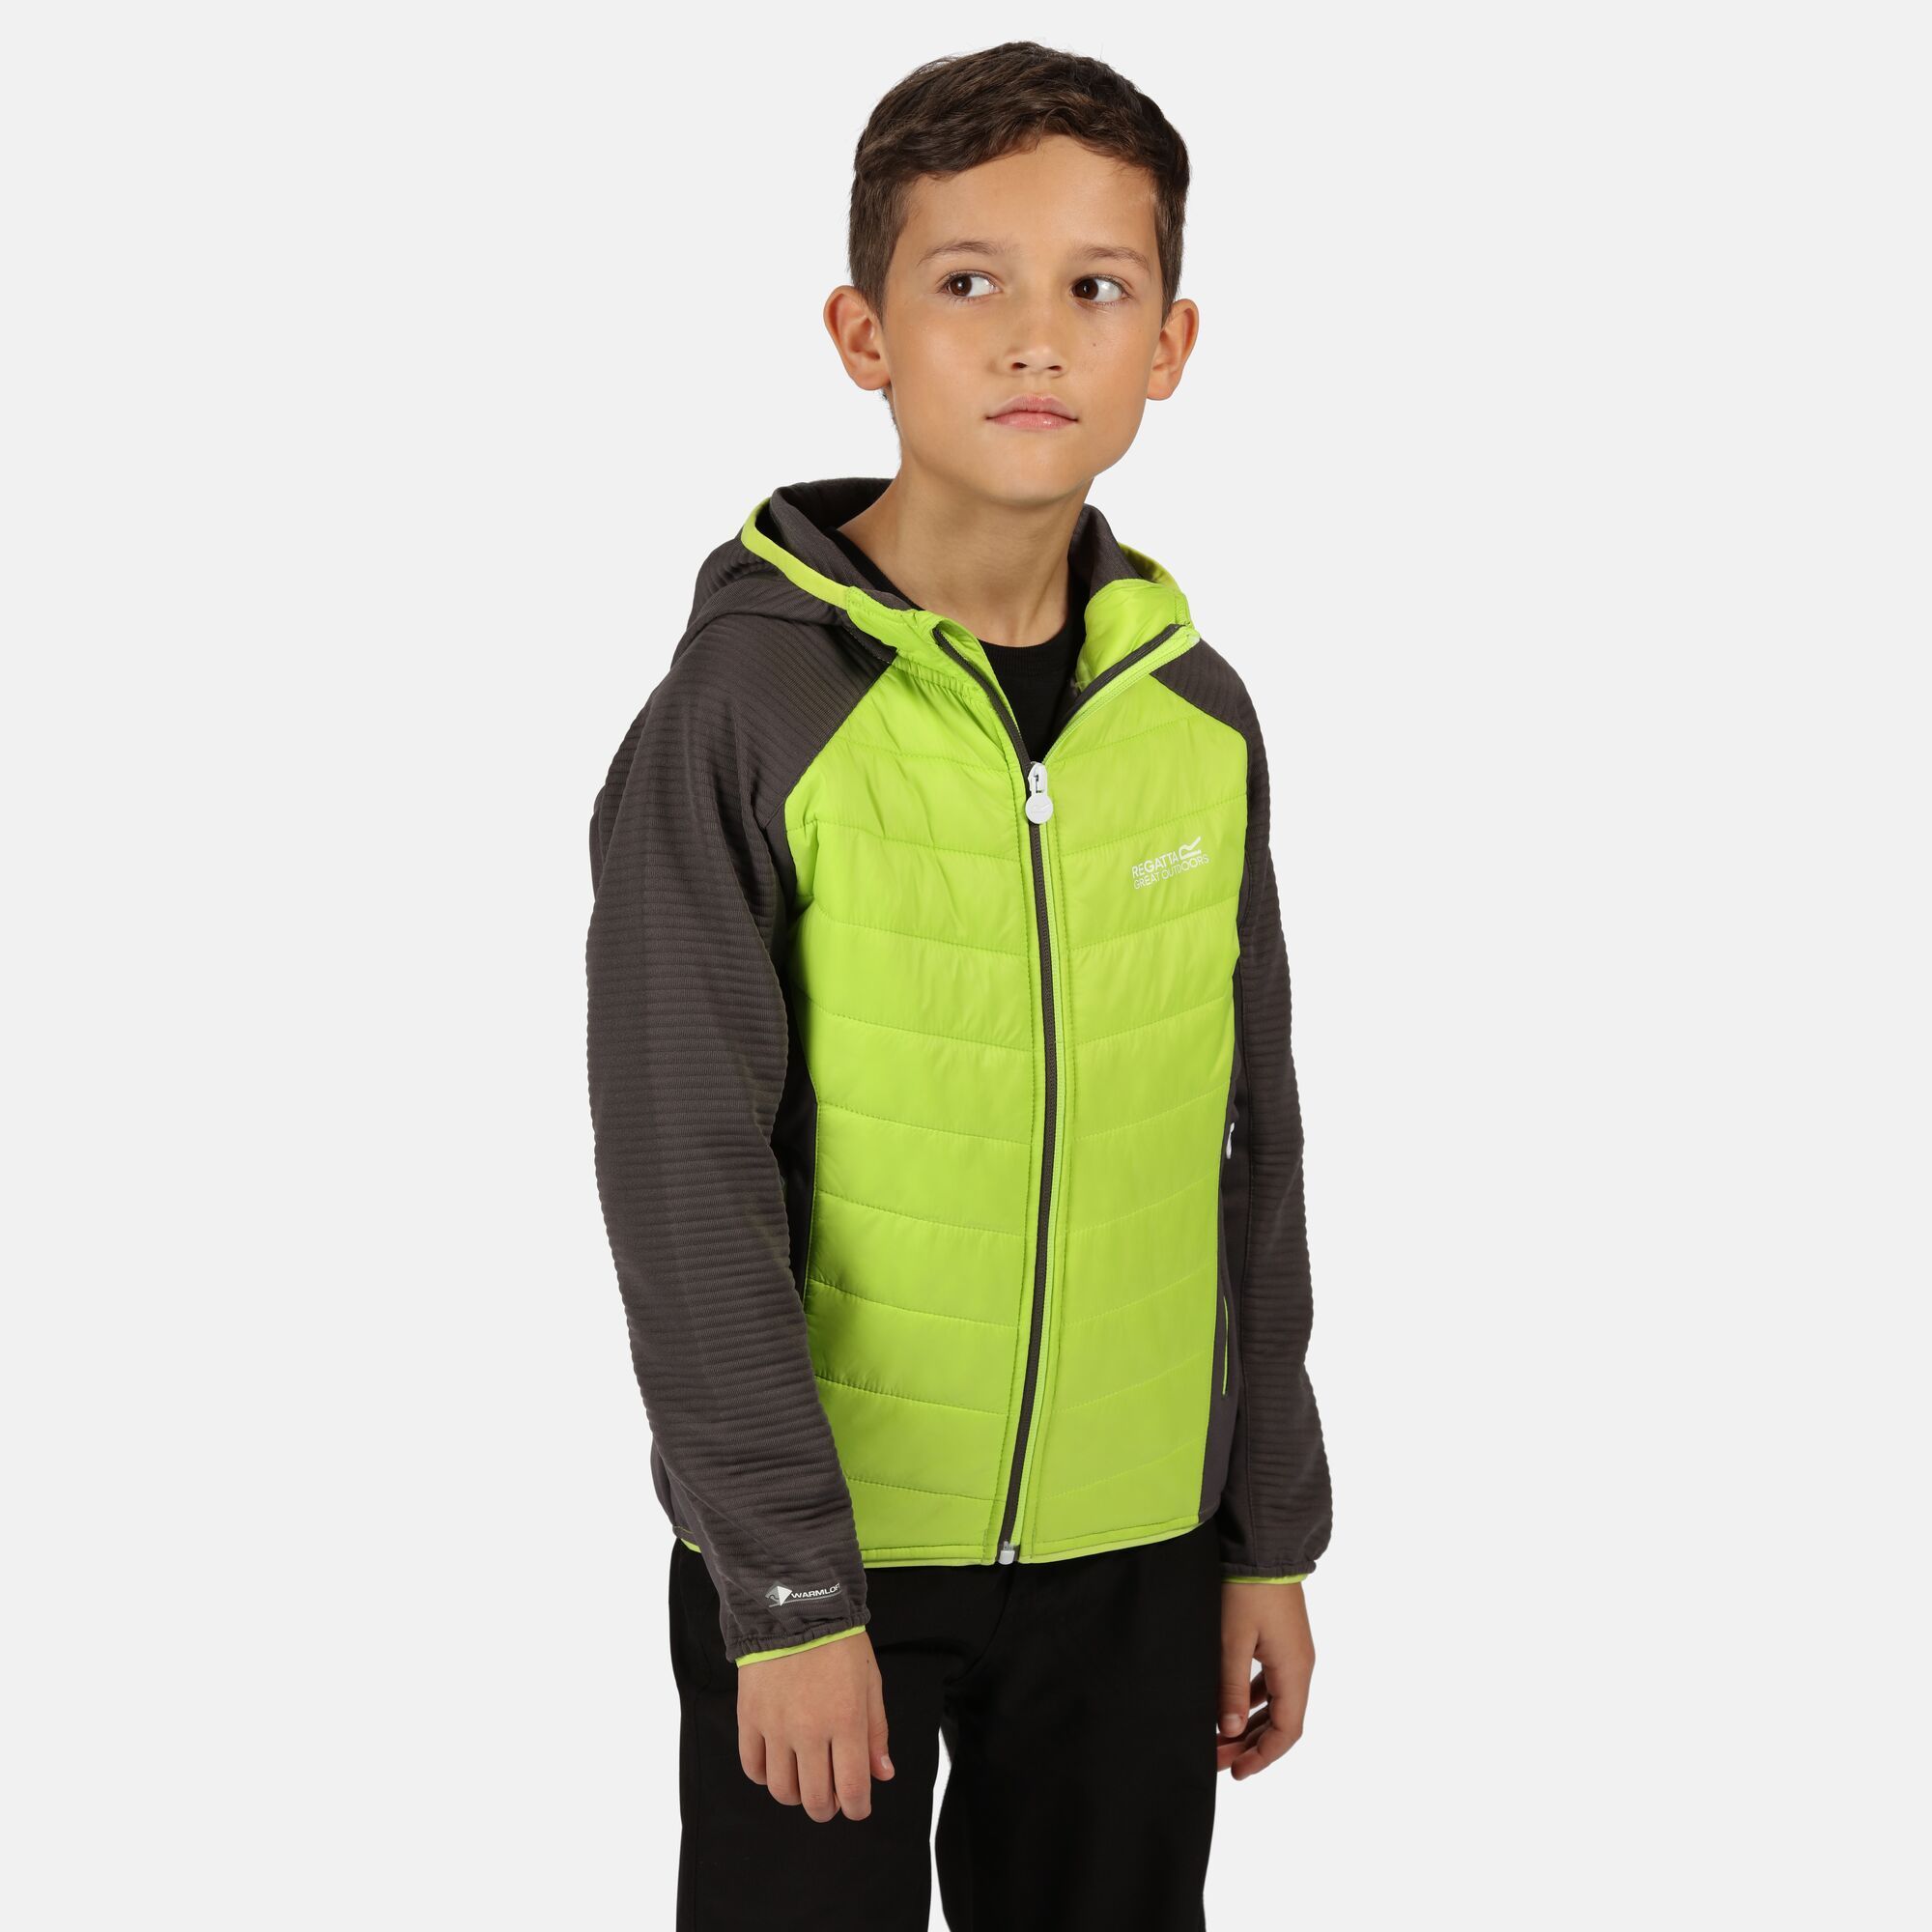 Material: 100% Polyester. Design: Quilted. Compressible, Lightweight. Fabric Technology: Lightweight, Stretch. Cuff: Elasticated. Neckline: Hooded. Sleeve-Type: Long-Sleeved. Pockets: 2 Front Pockets. Fastening: Zip.